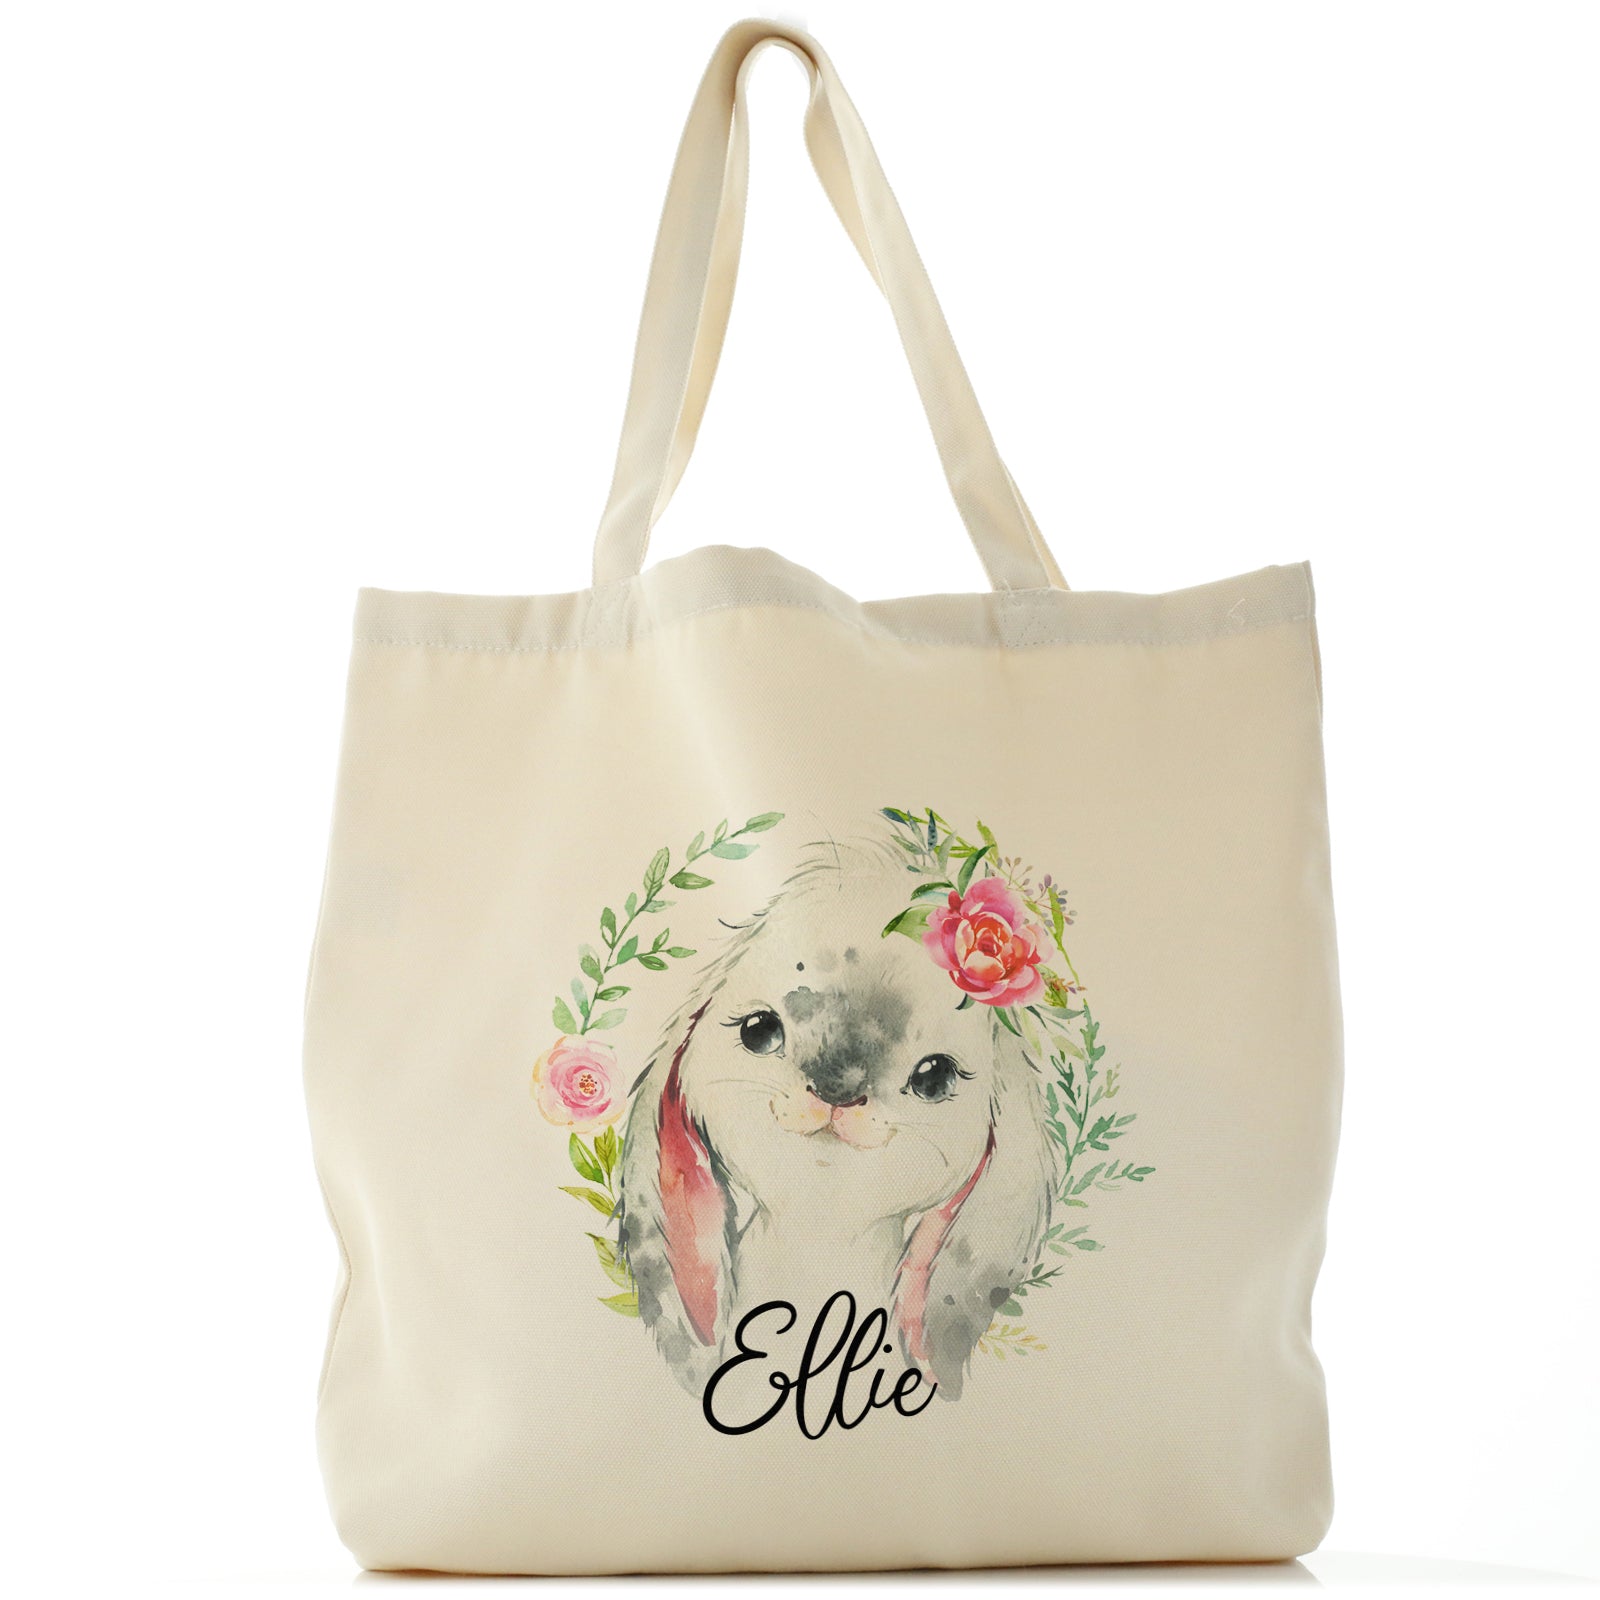 Personalised Canvas Tote Bag with Grey Rabbit Flower Wreath and Cute Text